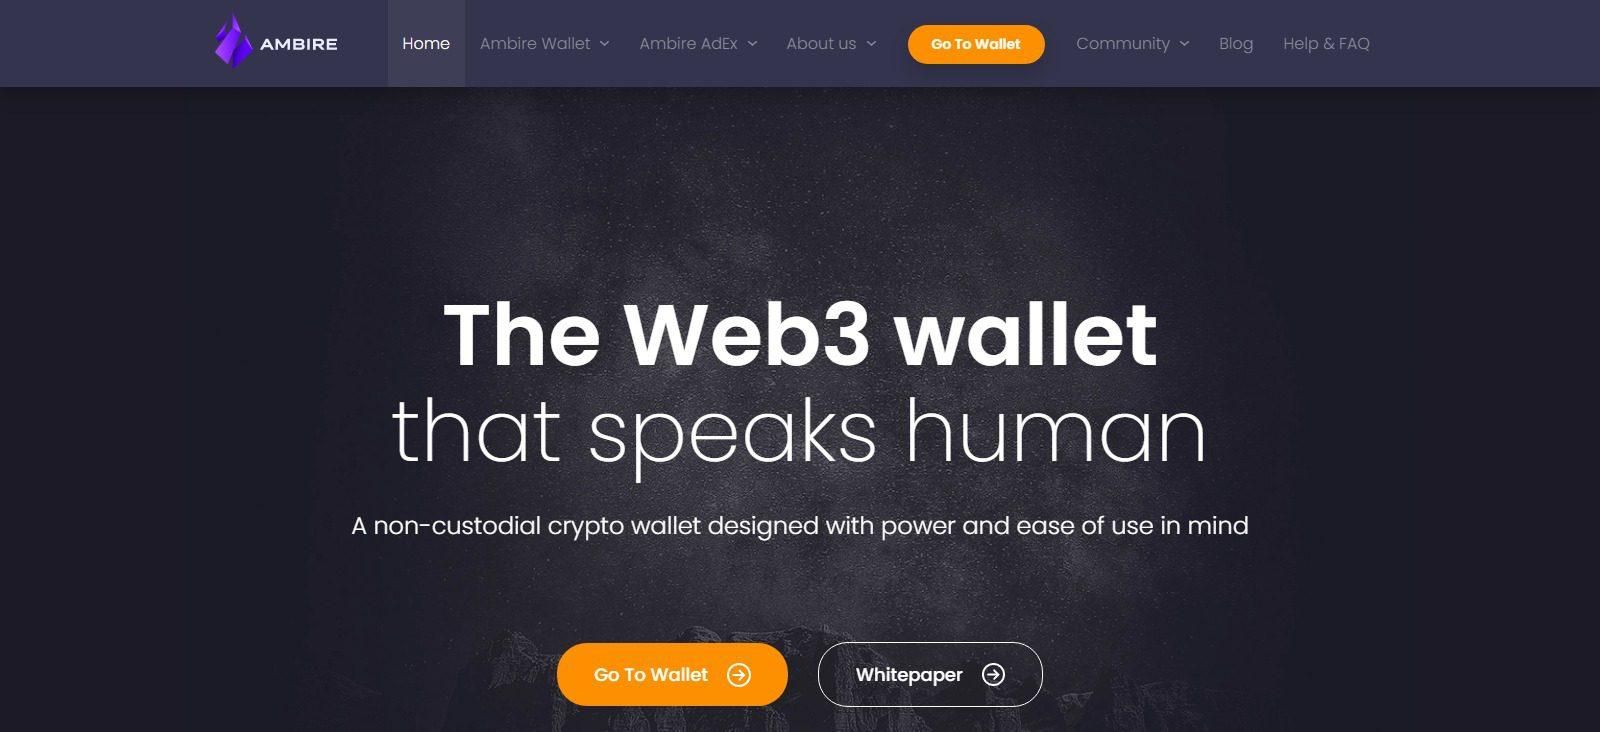 Ambire Wallet Review: The Web3 Wallet that Speaks Human